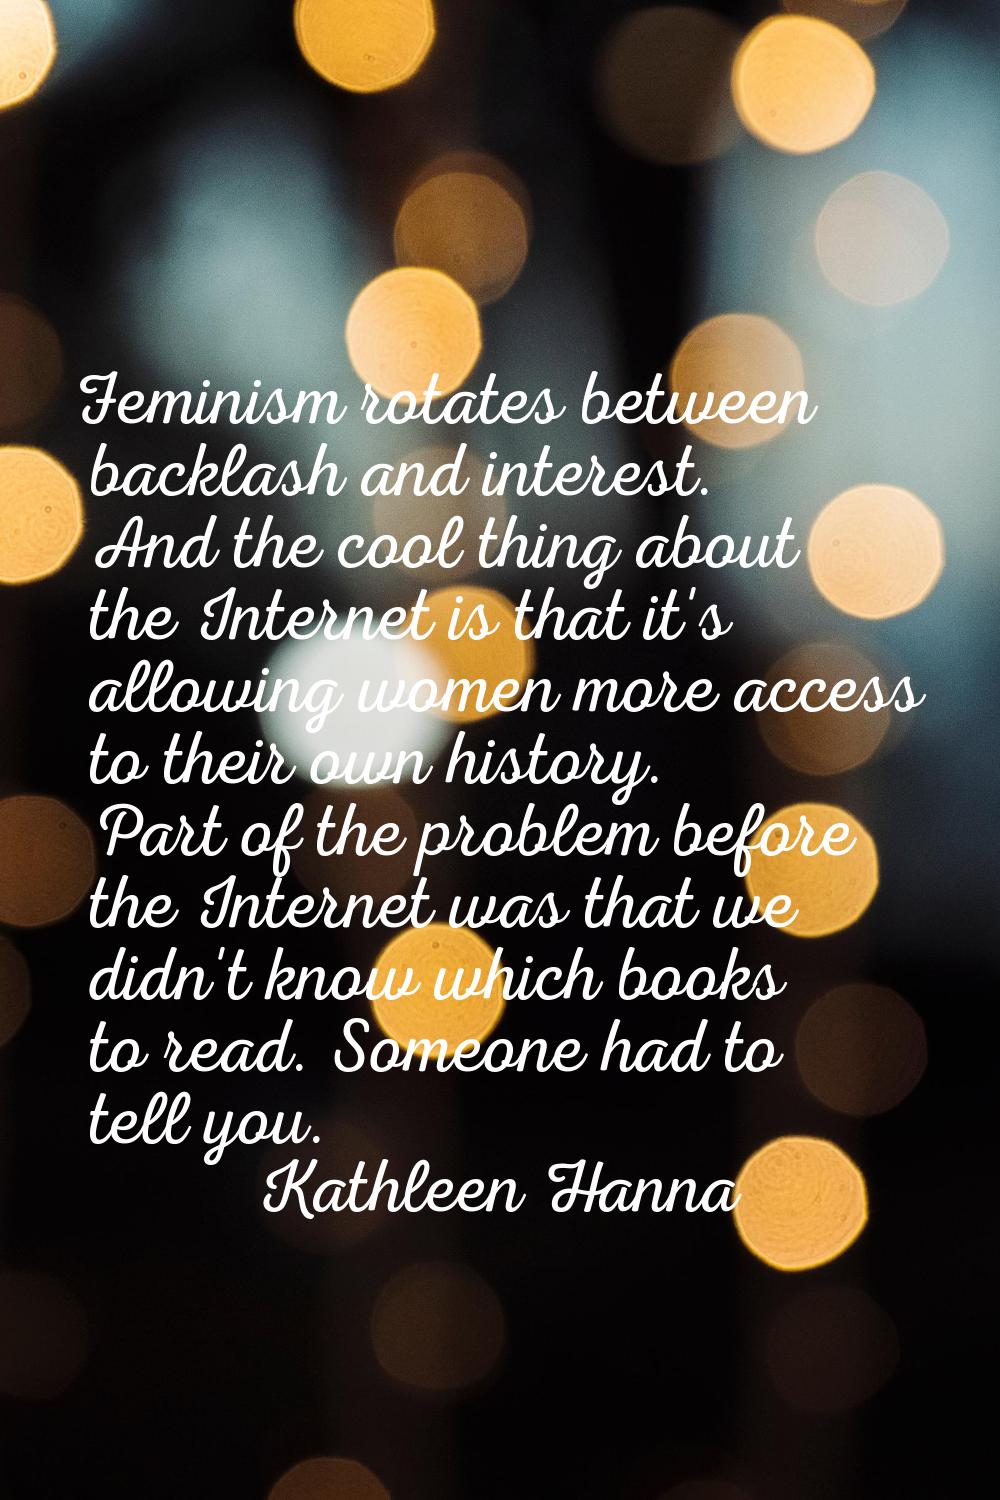 Feminism rotates between backlash and interest. And the cool thing about the Internet is that it's 